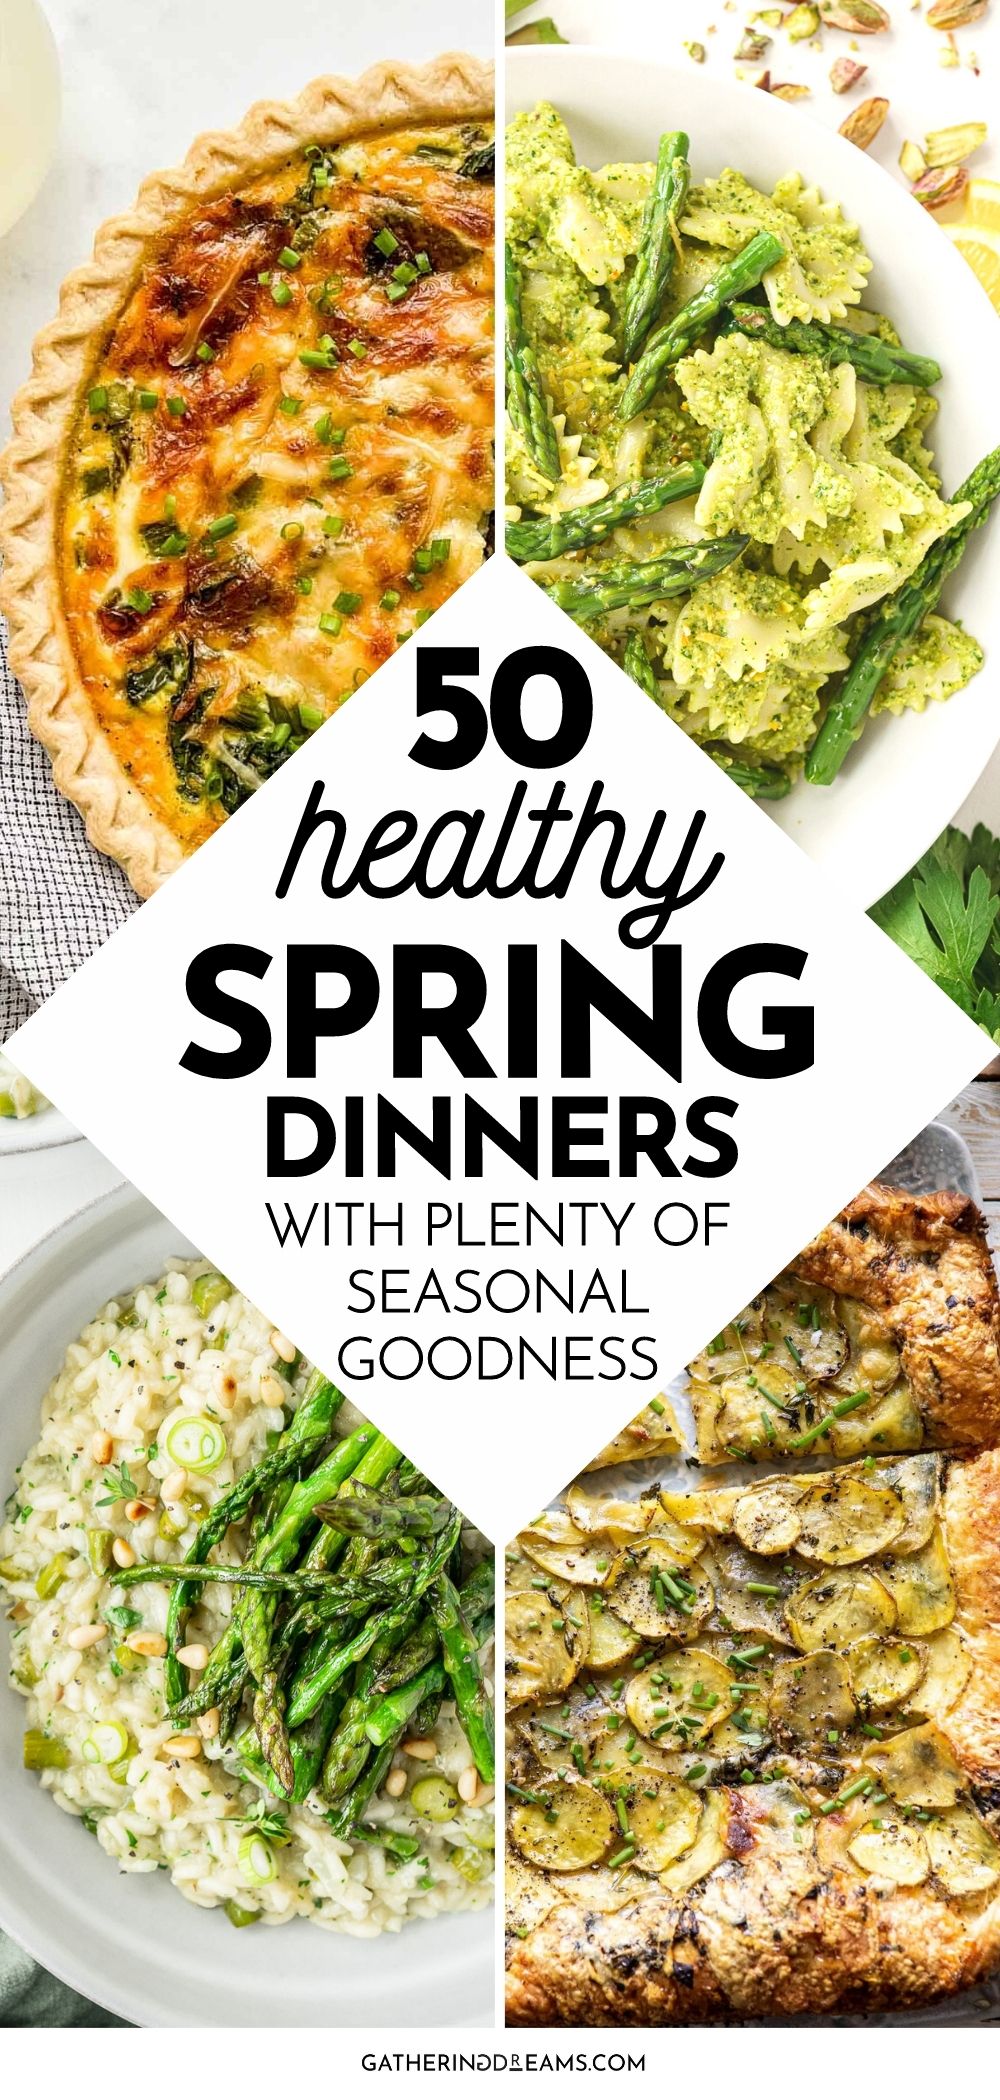 50 Healthy Spring Dinner Ideas To Brighten Your Plate